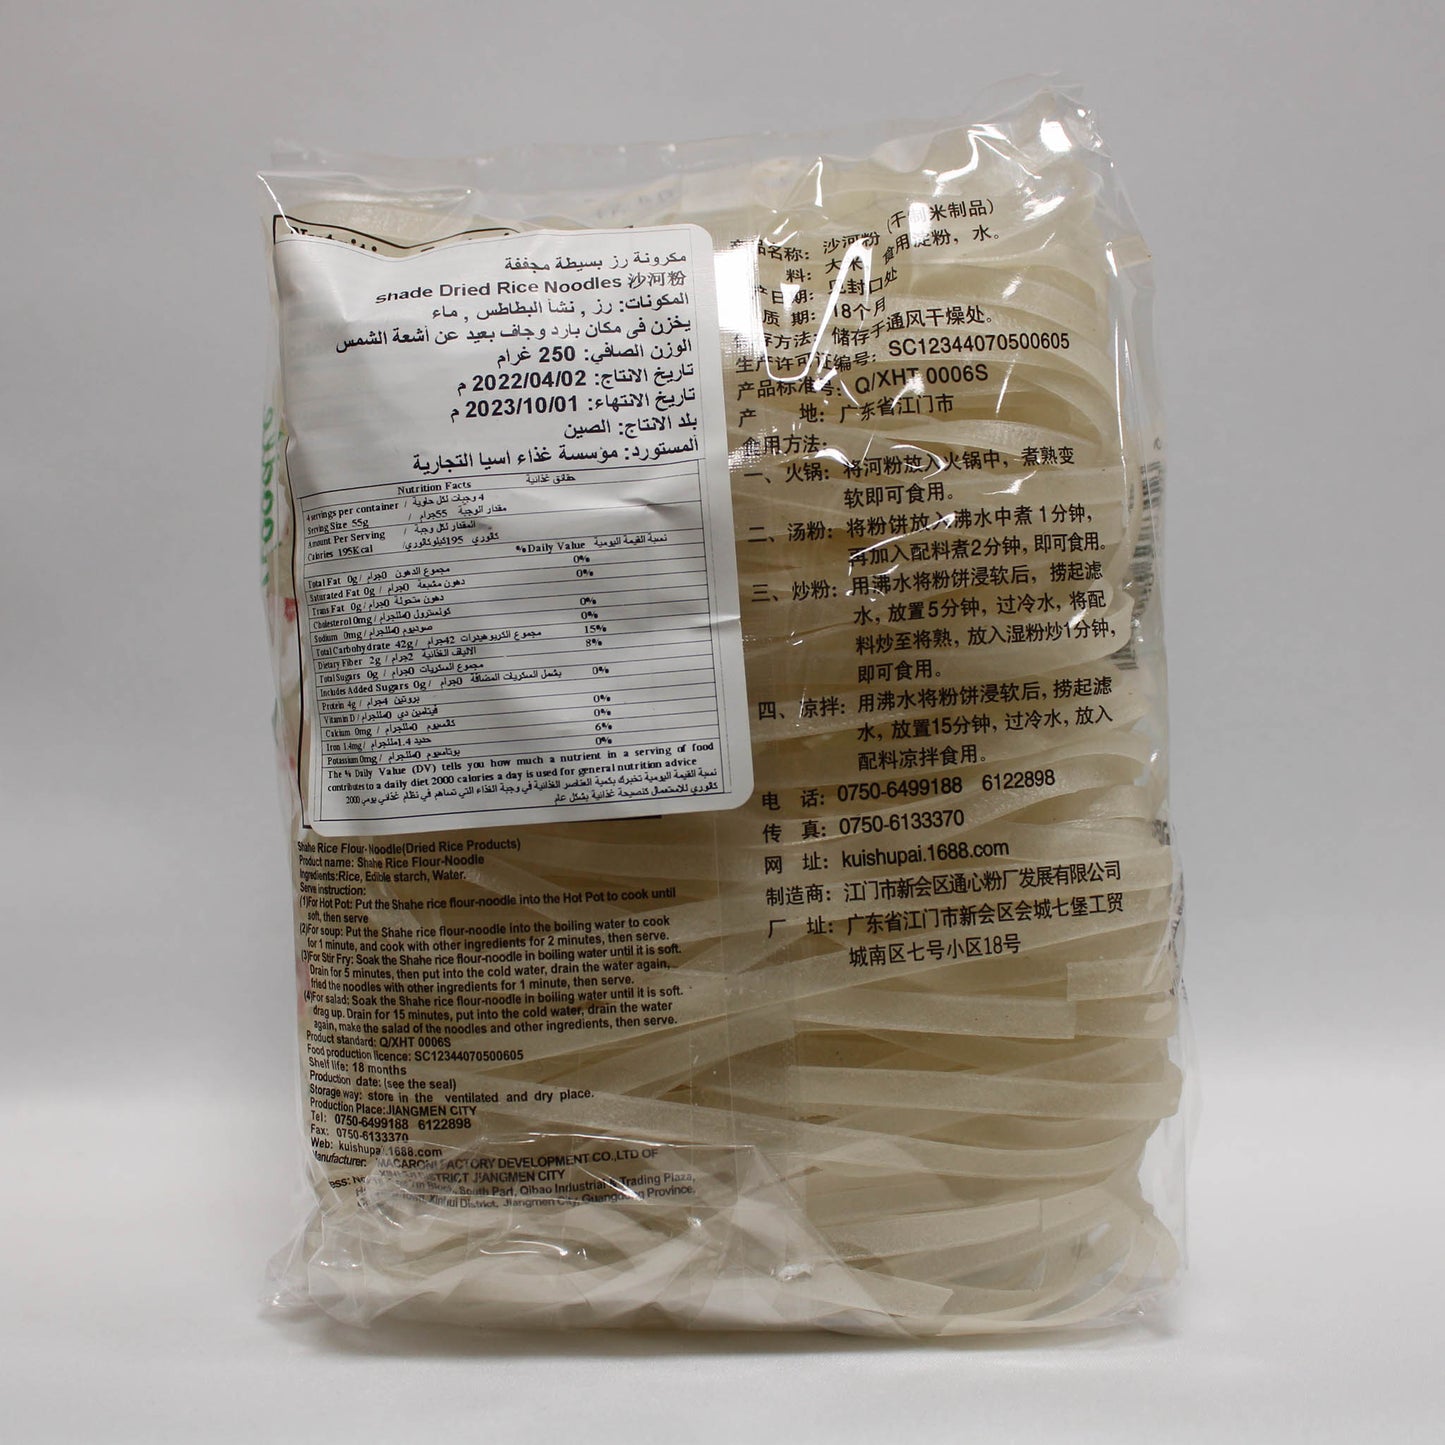 SHADE DRIED RICE NOODLES (250gm*40)